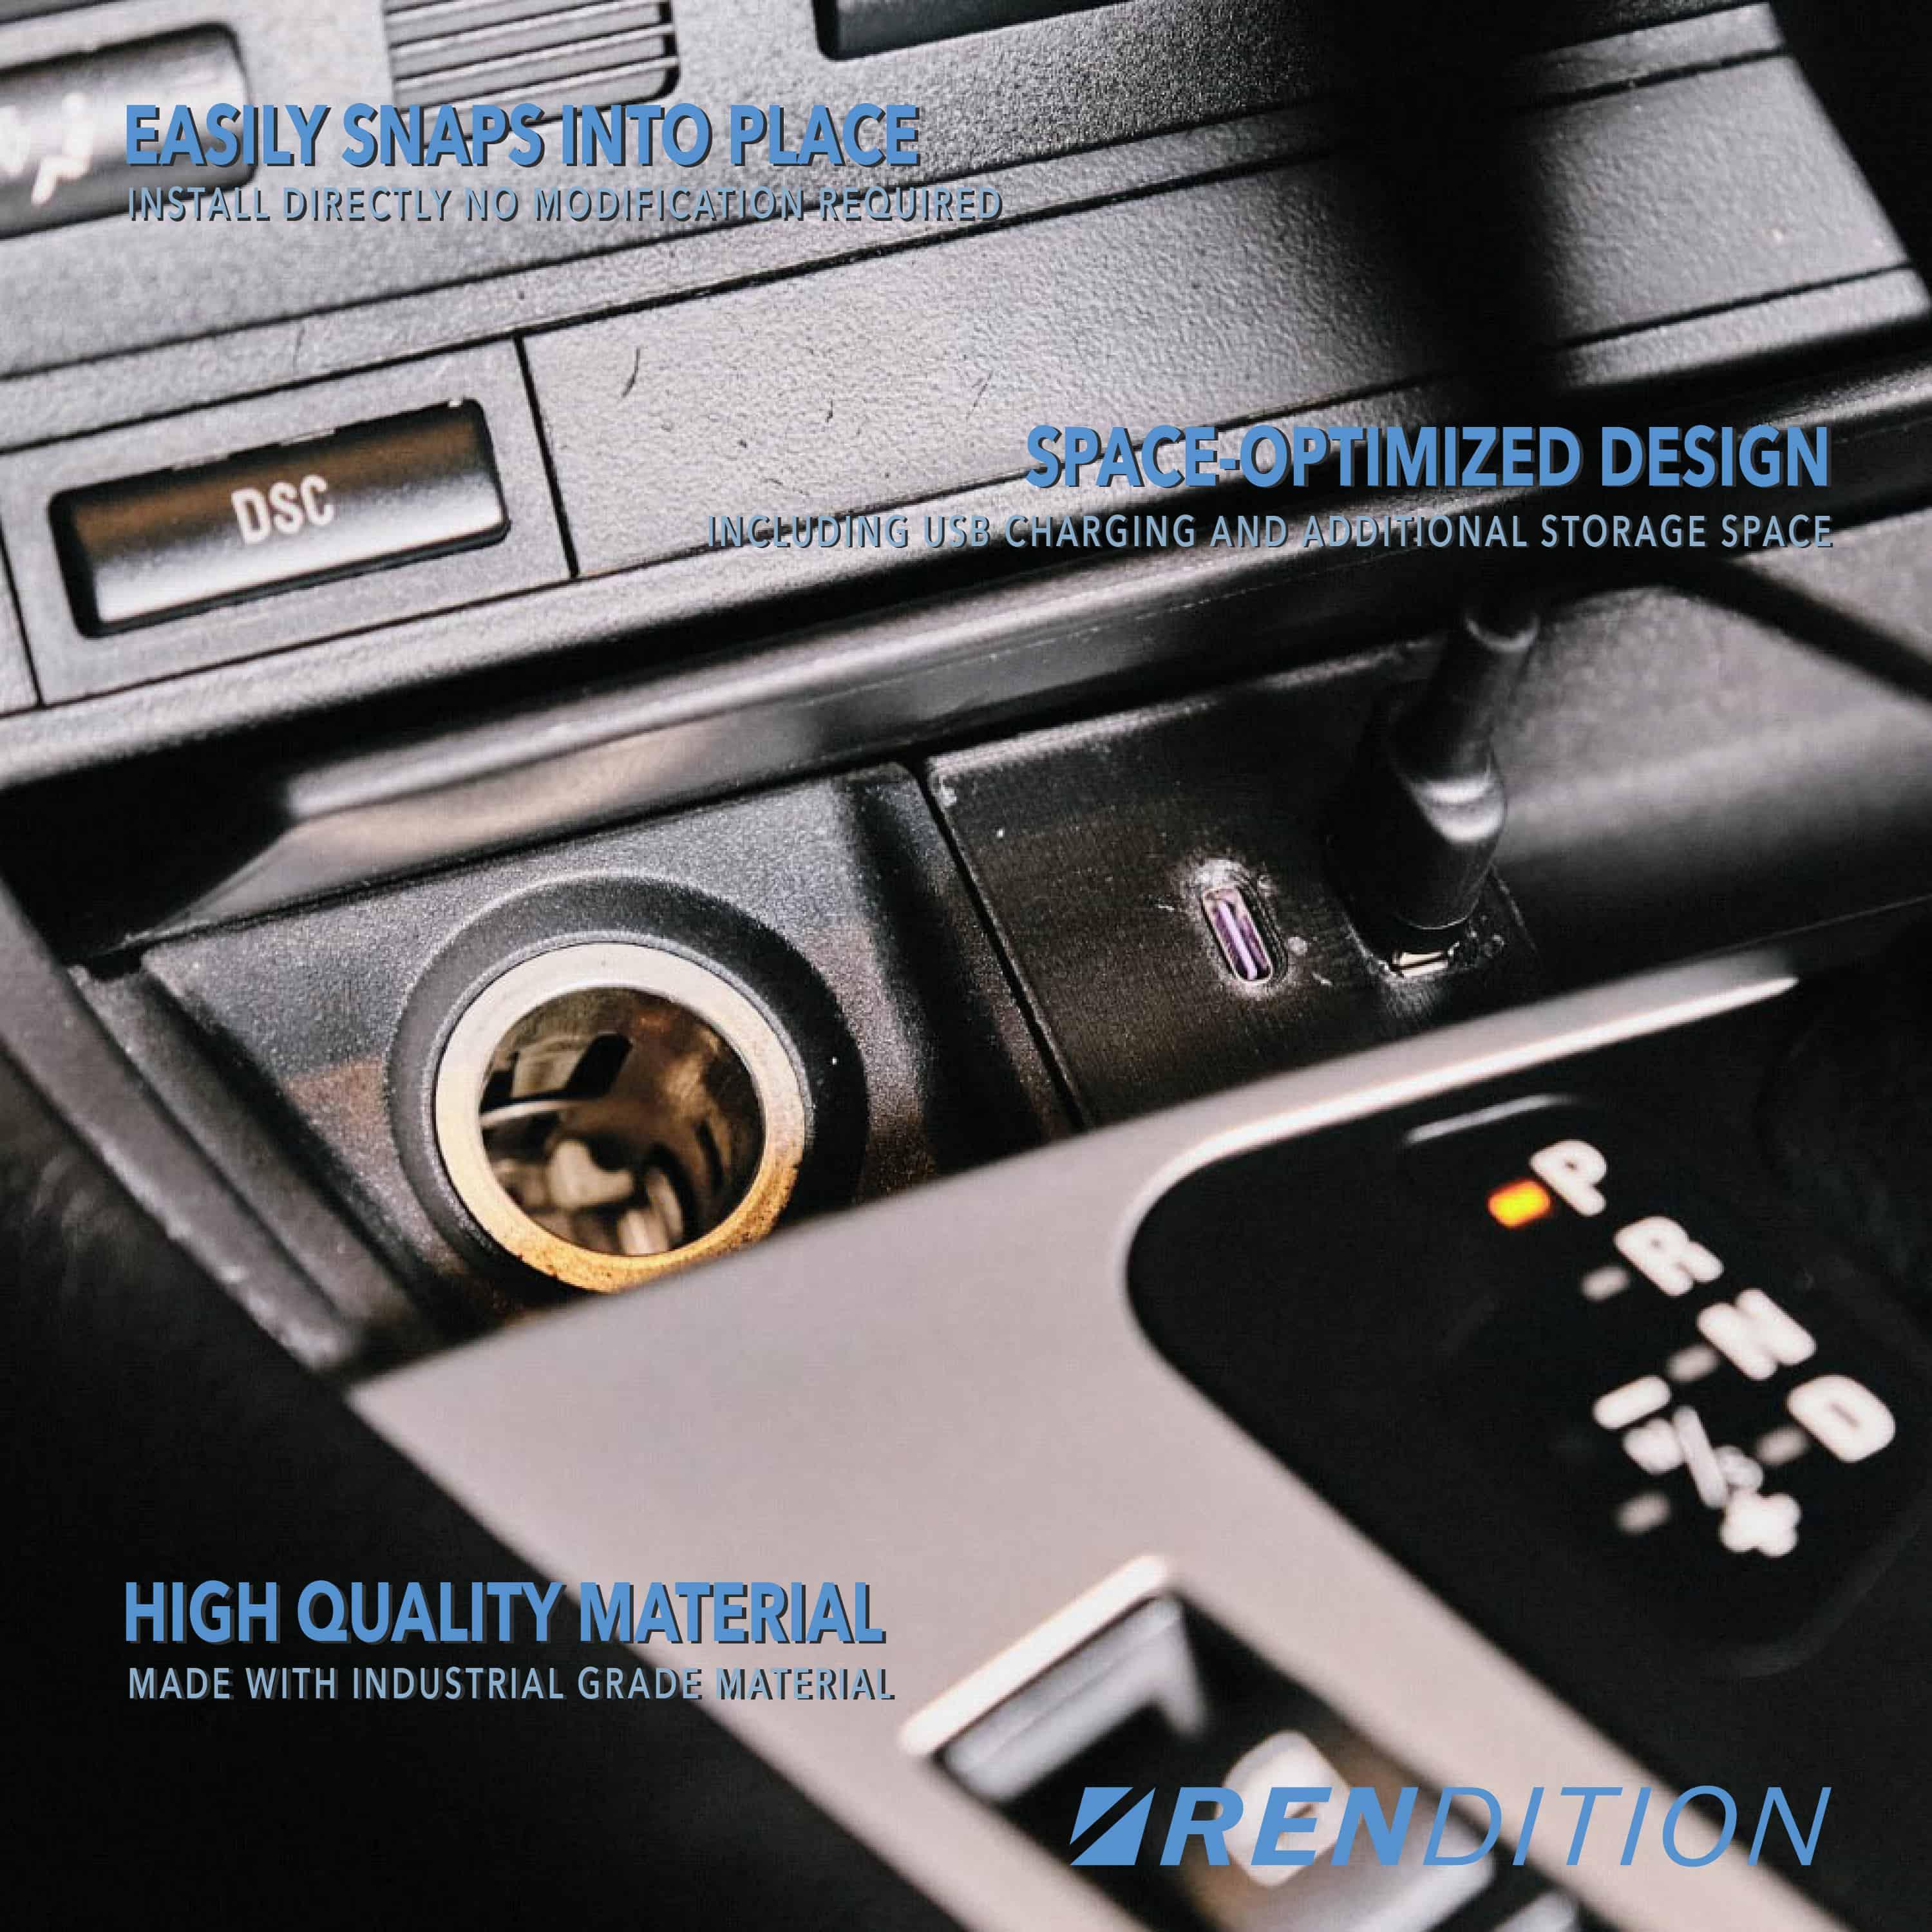 BMW E46 FRONT ASHTRAY USB CHARGER & SPACE OPTIMISATION - K2 Industries